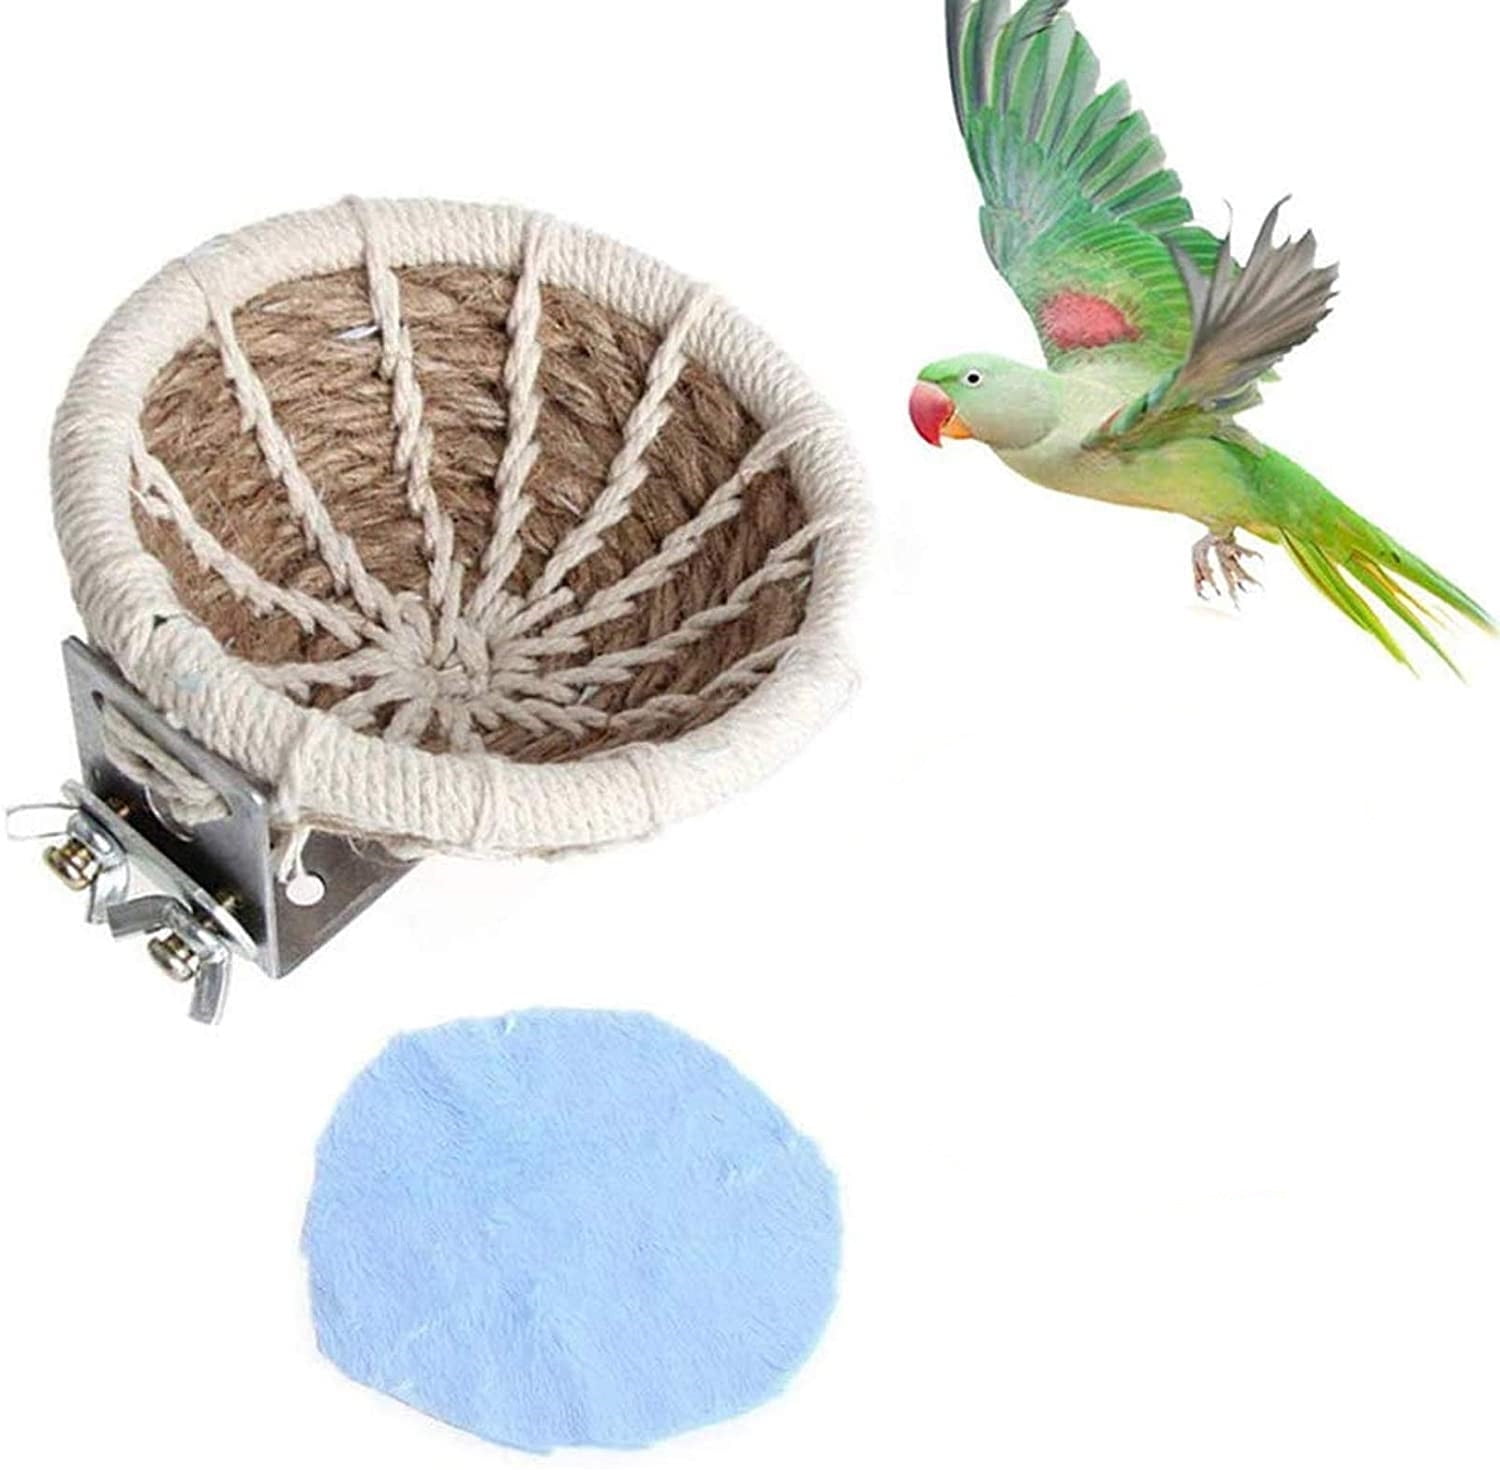 Bird Breeding Nest Rope Weave Bird Breeding Nest Bed for Parakeet Cockatiel Canary Lovebird and Small Parrot Cage Hatching Nesting Box